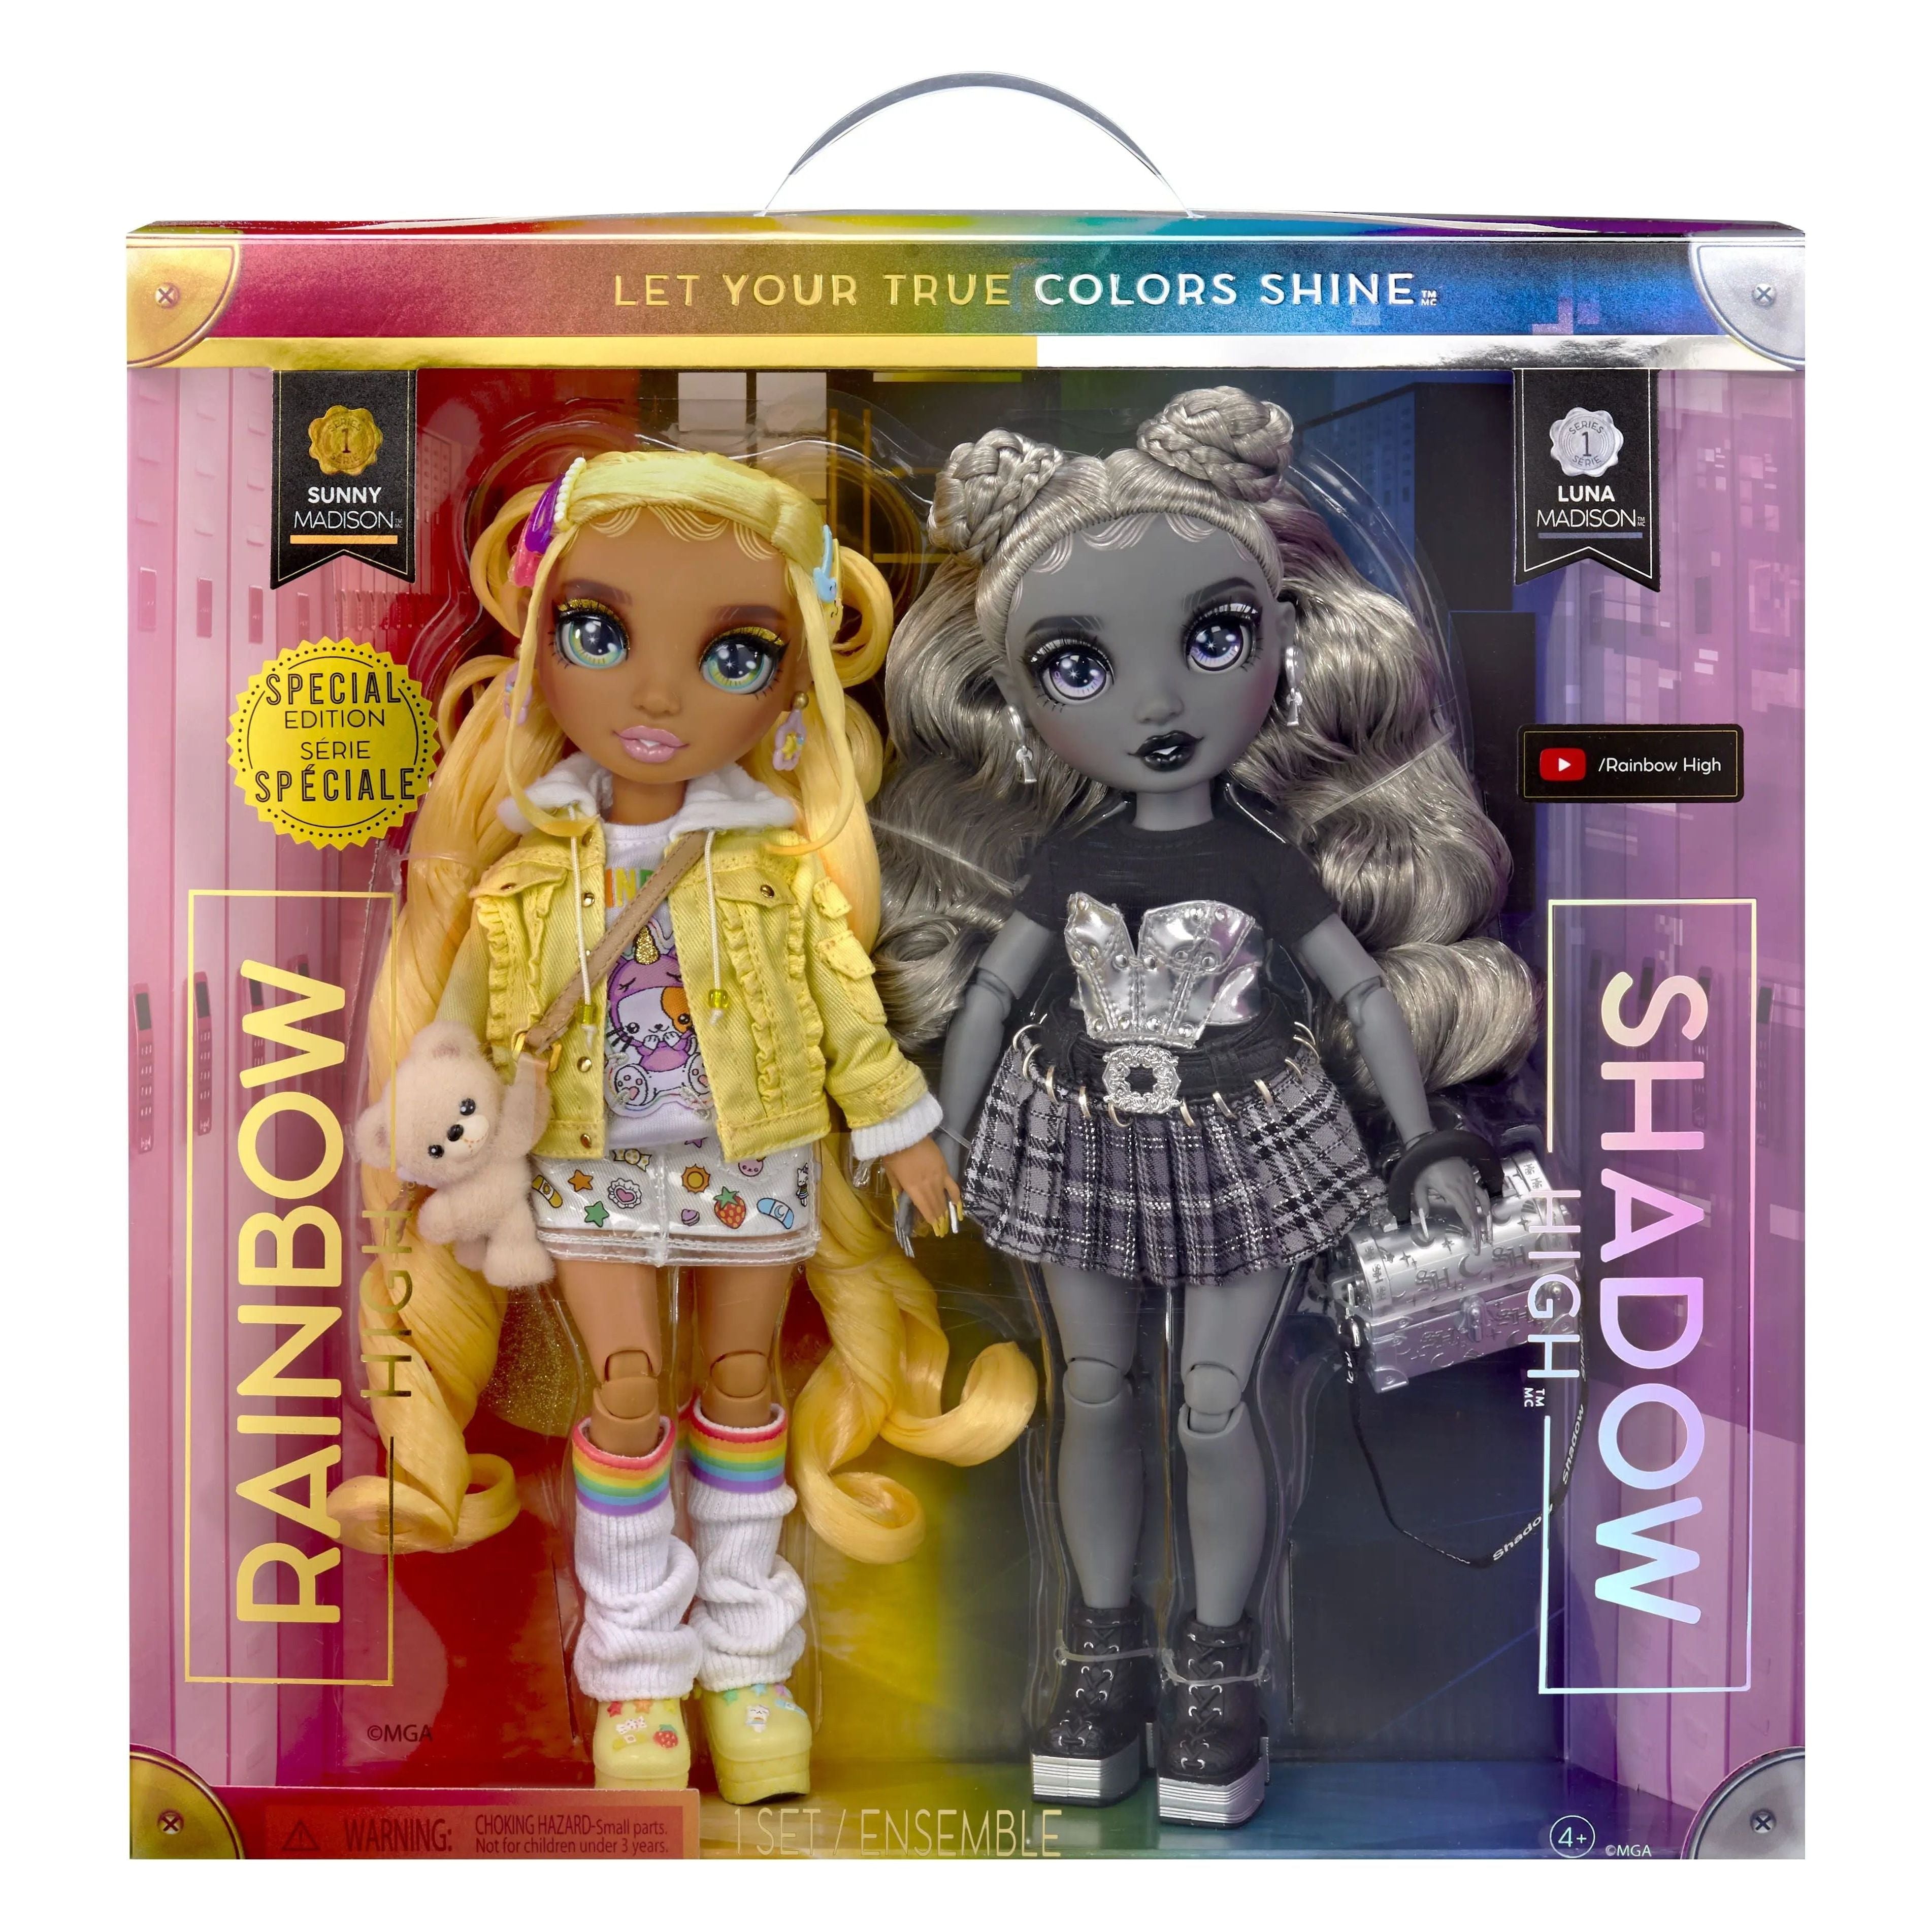 Rainbow High Fantastic Fashion Doll - SUNNY MADISON - Yellow 11” Fashion  Doll and Playset with 2 Outfits & Fashion Play Accessories - Great for Kids